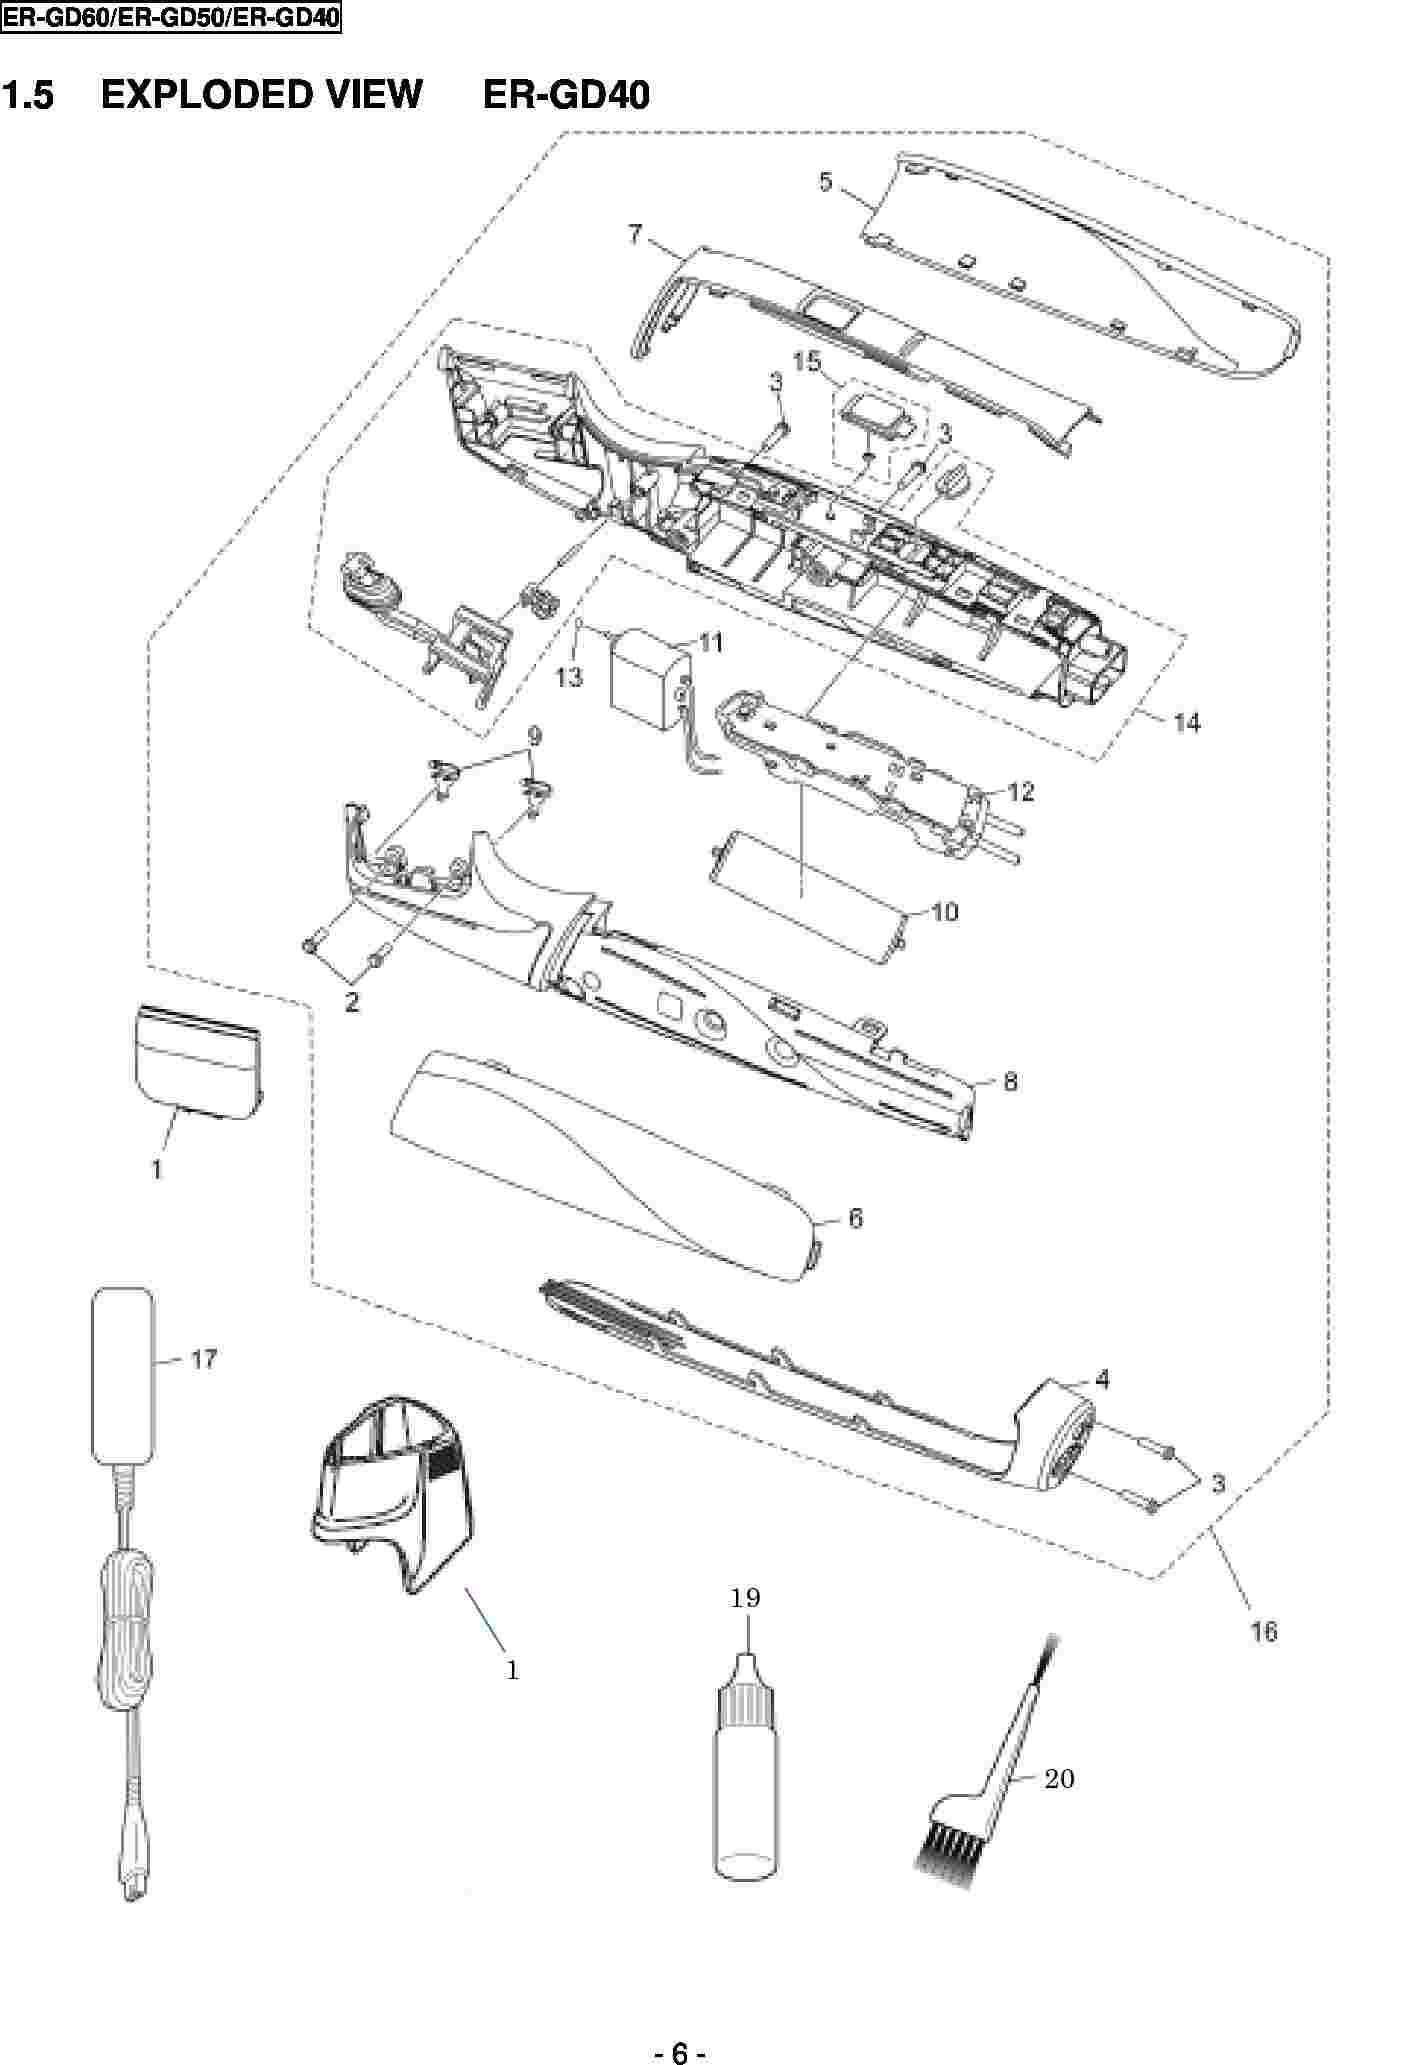 ER-GD40: Exploded View